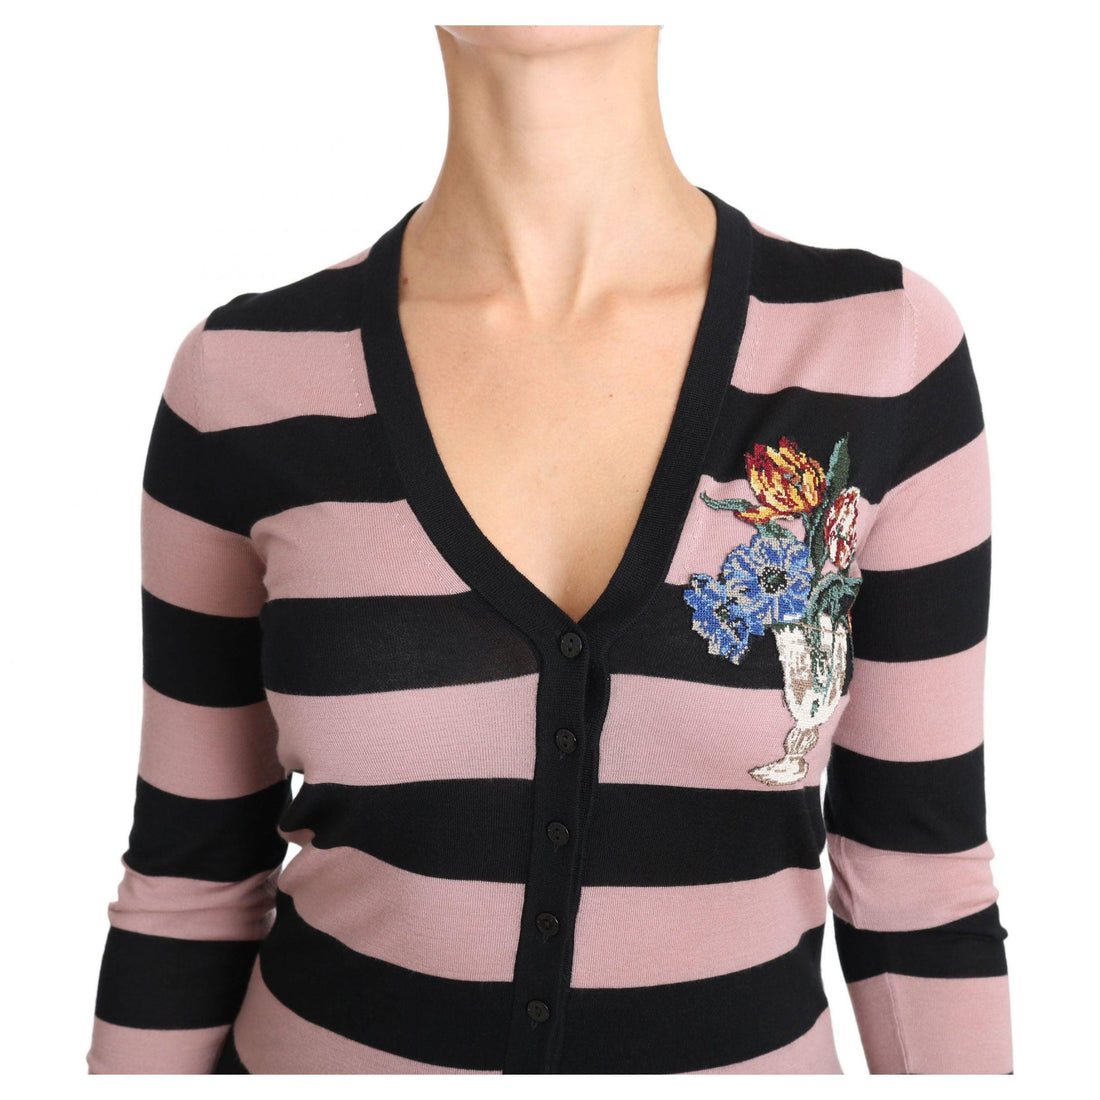 Dolce & Gabbana Pink Floral Cashmere Cardigan Sweater - Paris Deluxe